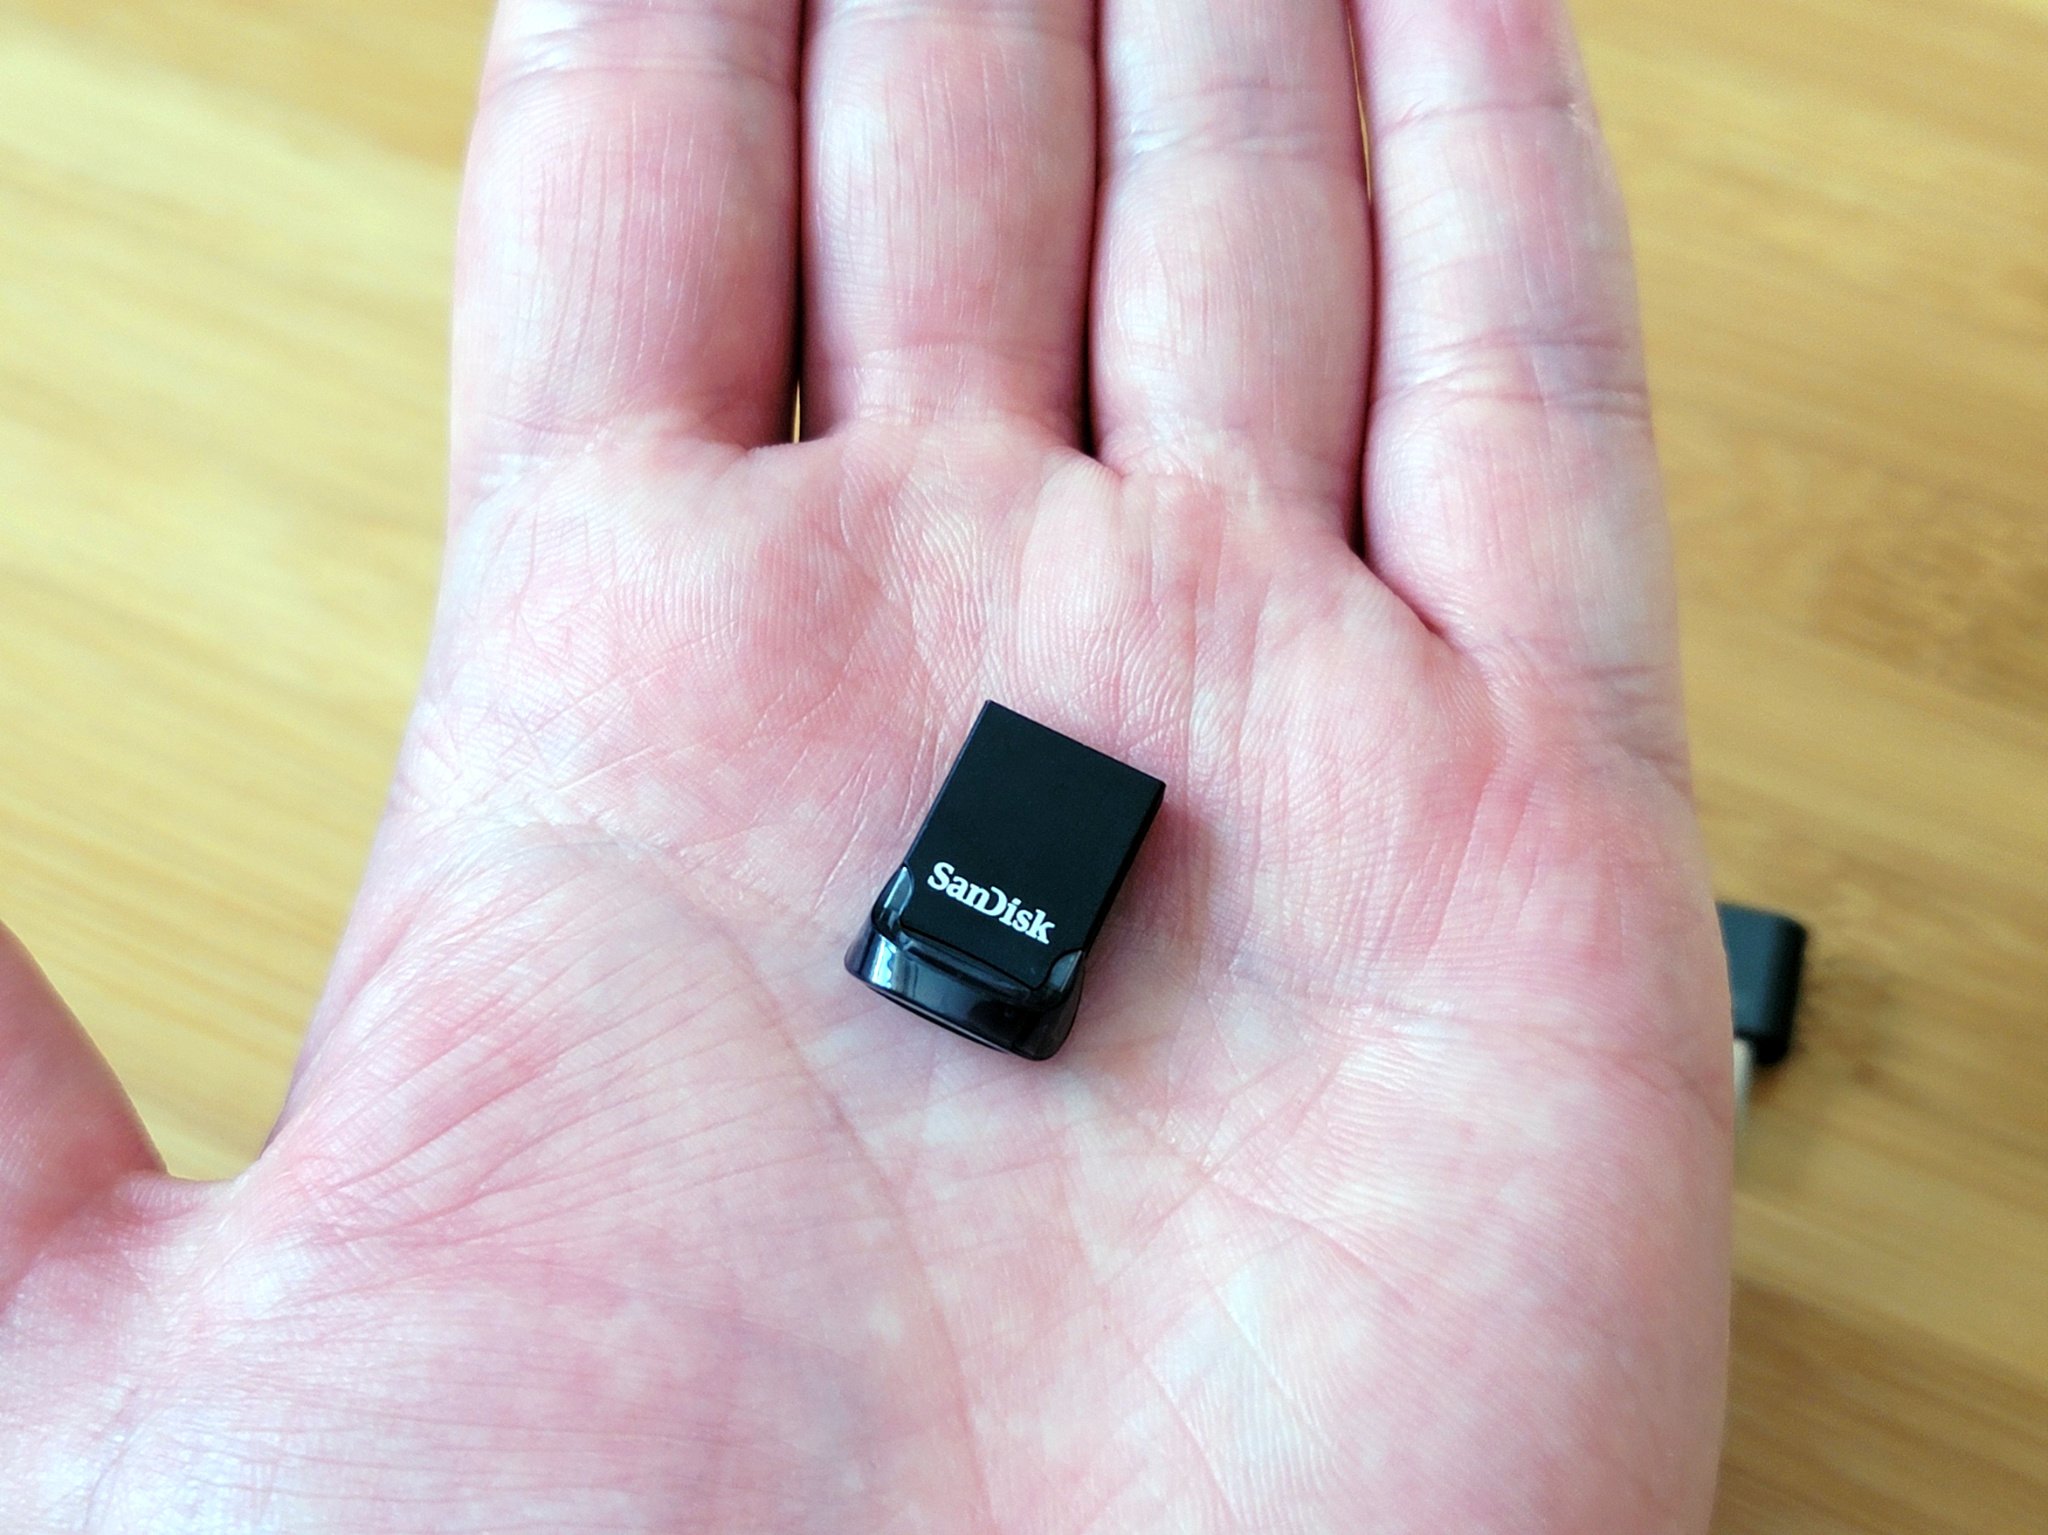 SanDisk Ultra Fit review: A slim, simple flash drive that blends